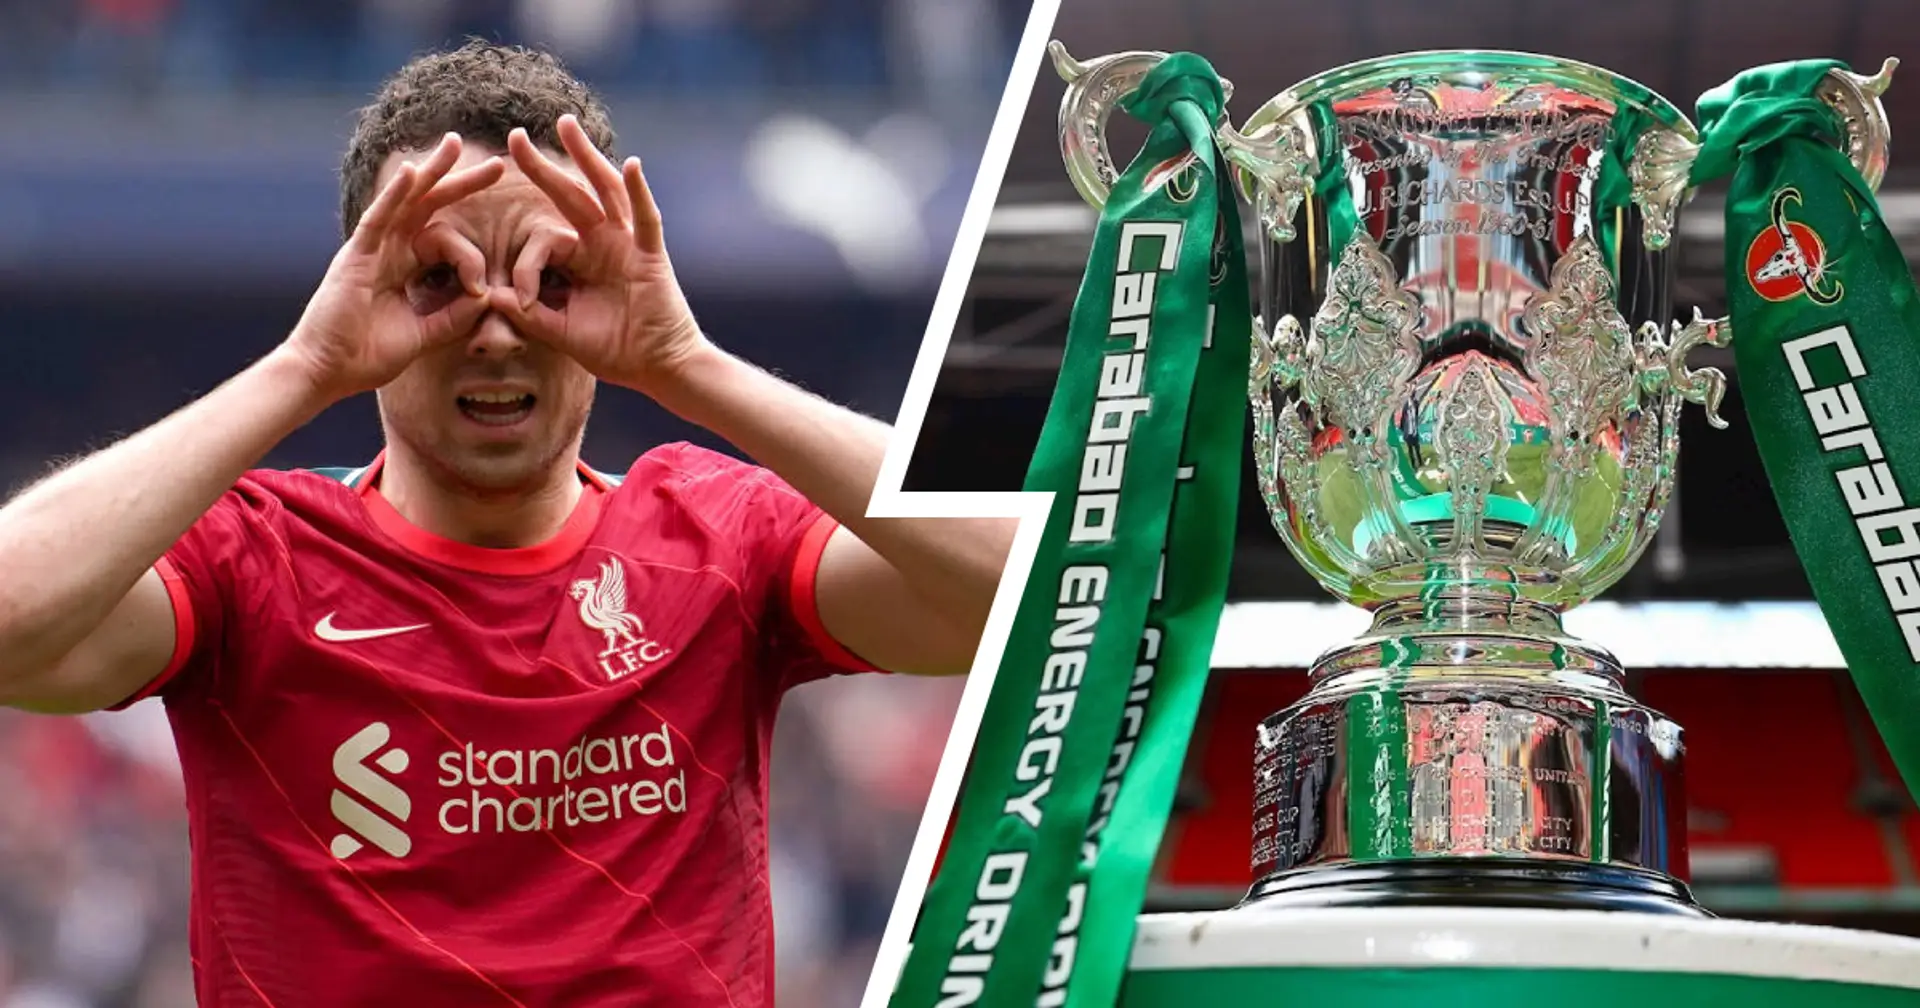 Date for Carabao Cup clash with Derby named: how it impacts Liverpool schedule - explained